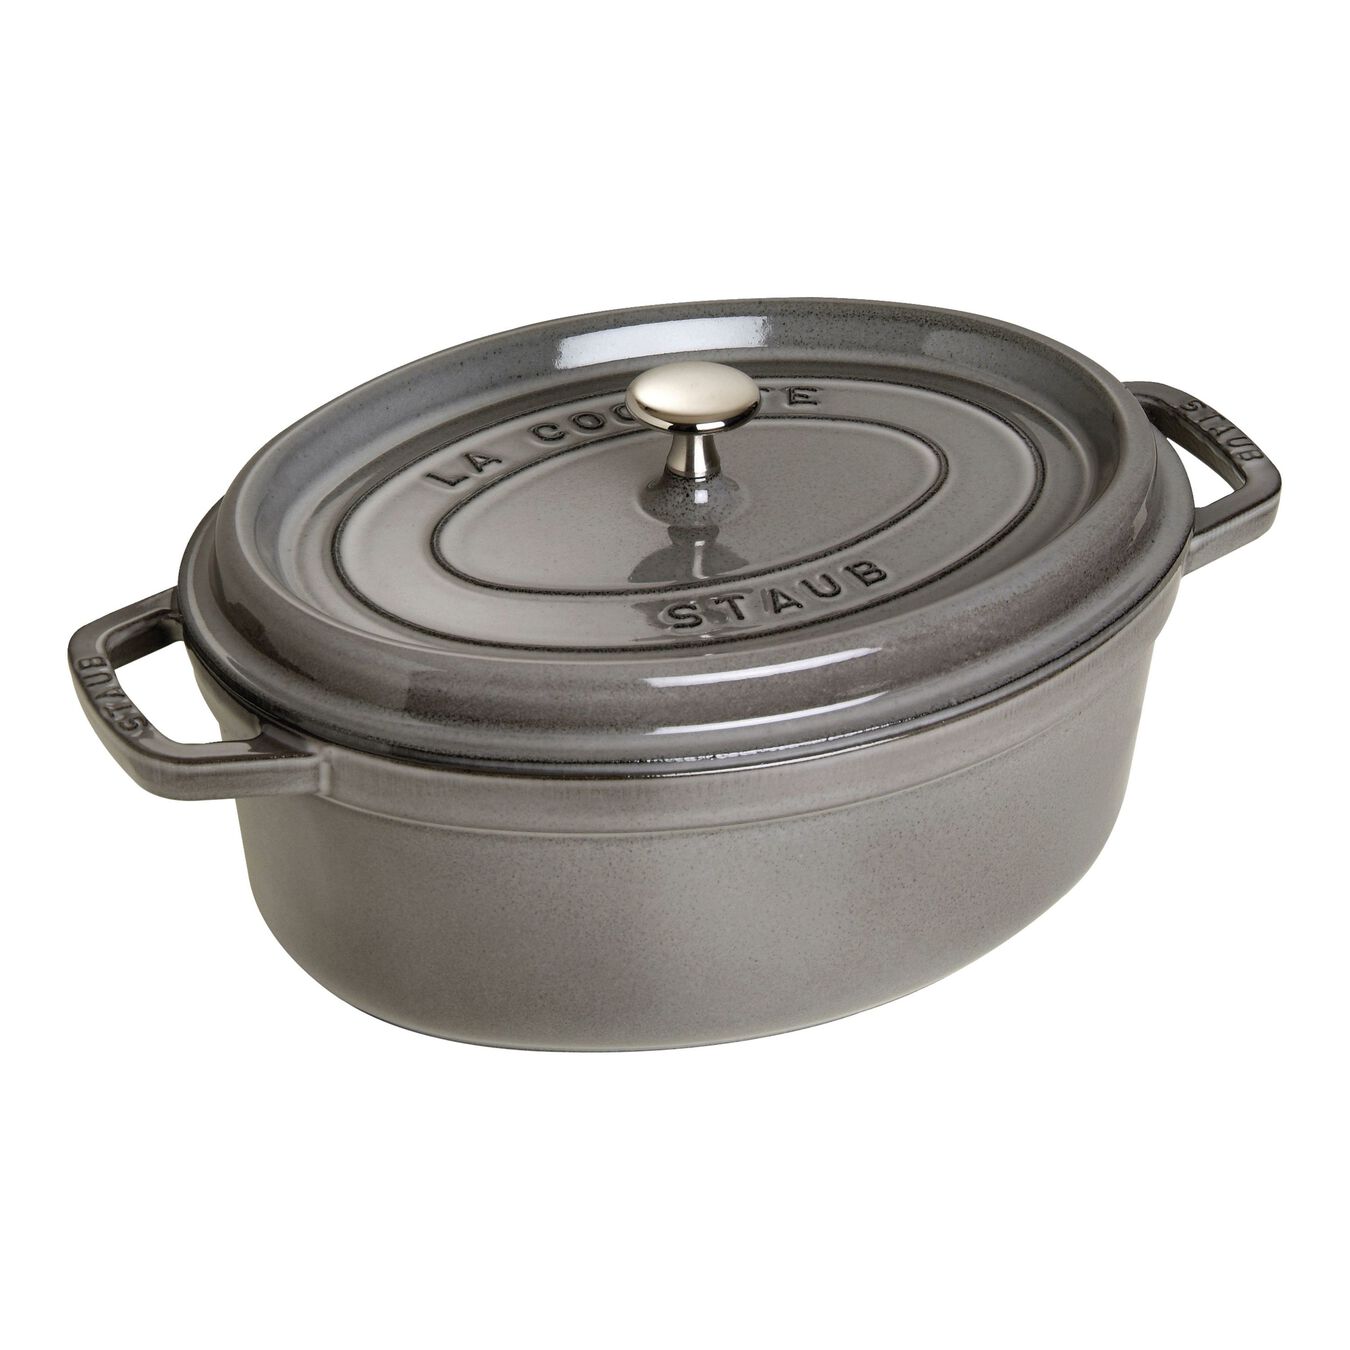 5.5 l cast iron oval Cocotte, graphite-grey - Visual Imperfections,,large 1